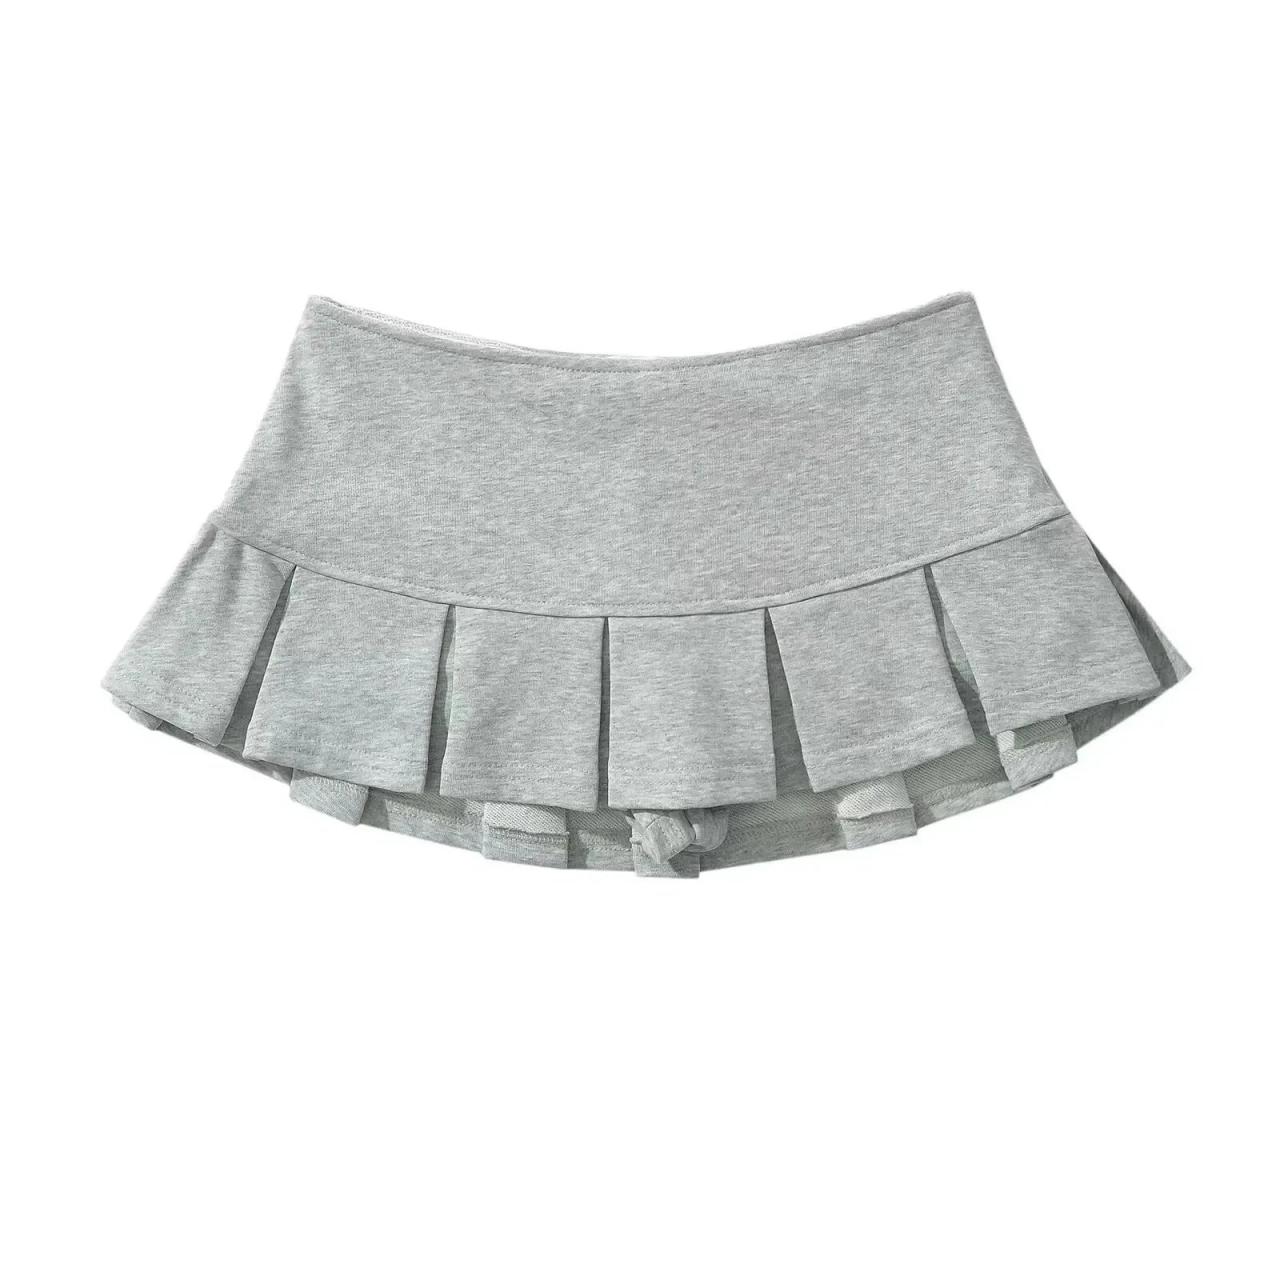 Girls Grey Cotton Pleated Skirt With Elastic Waistband